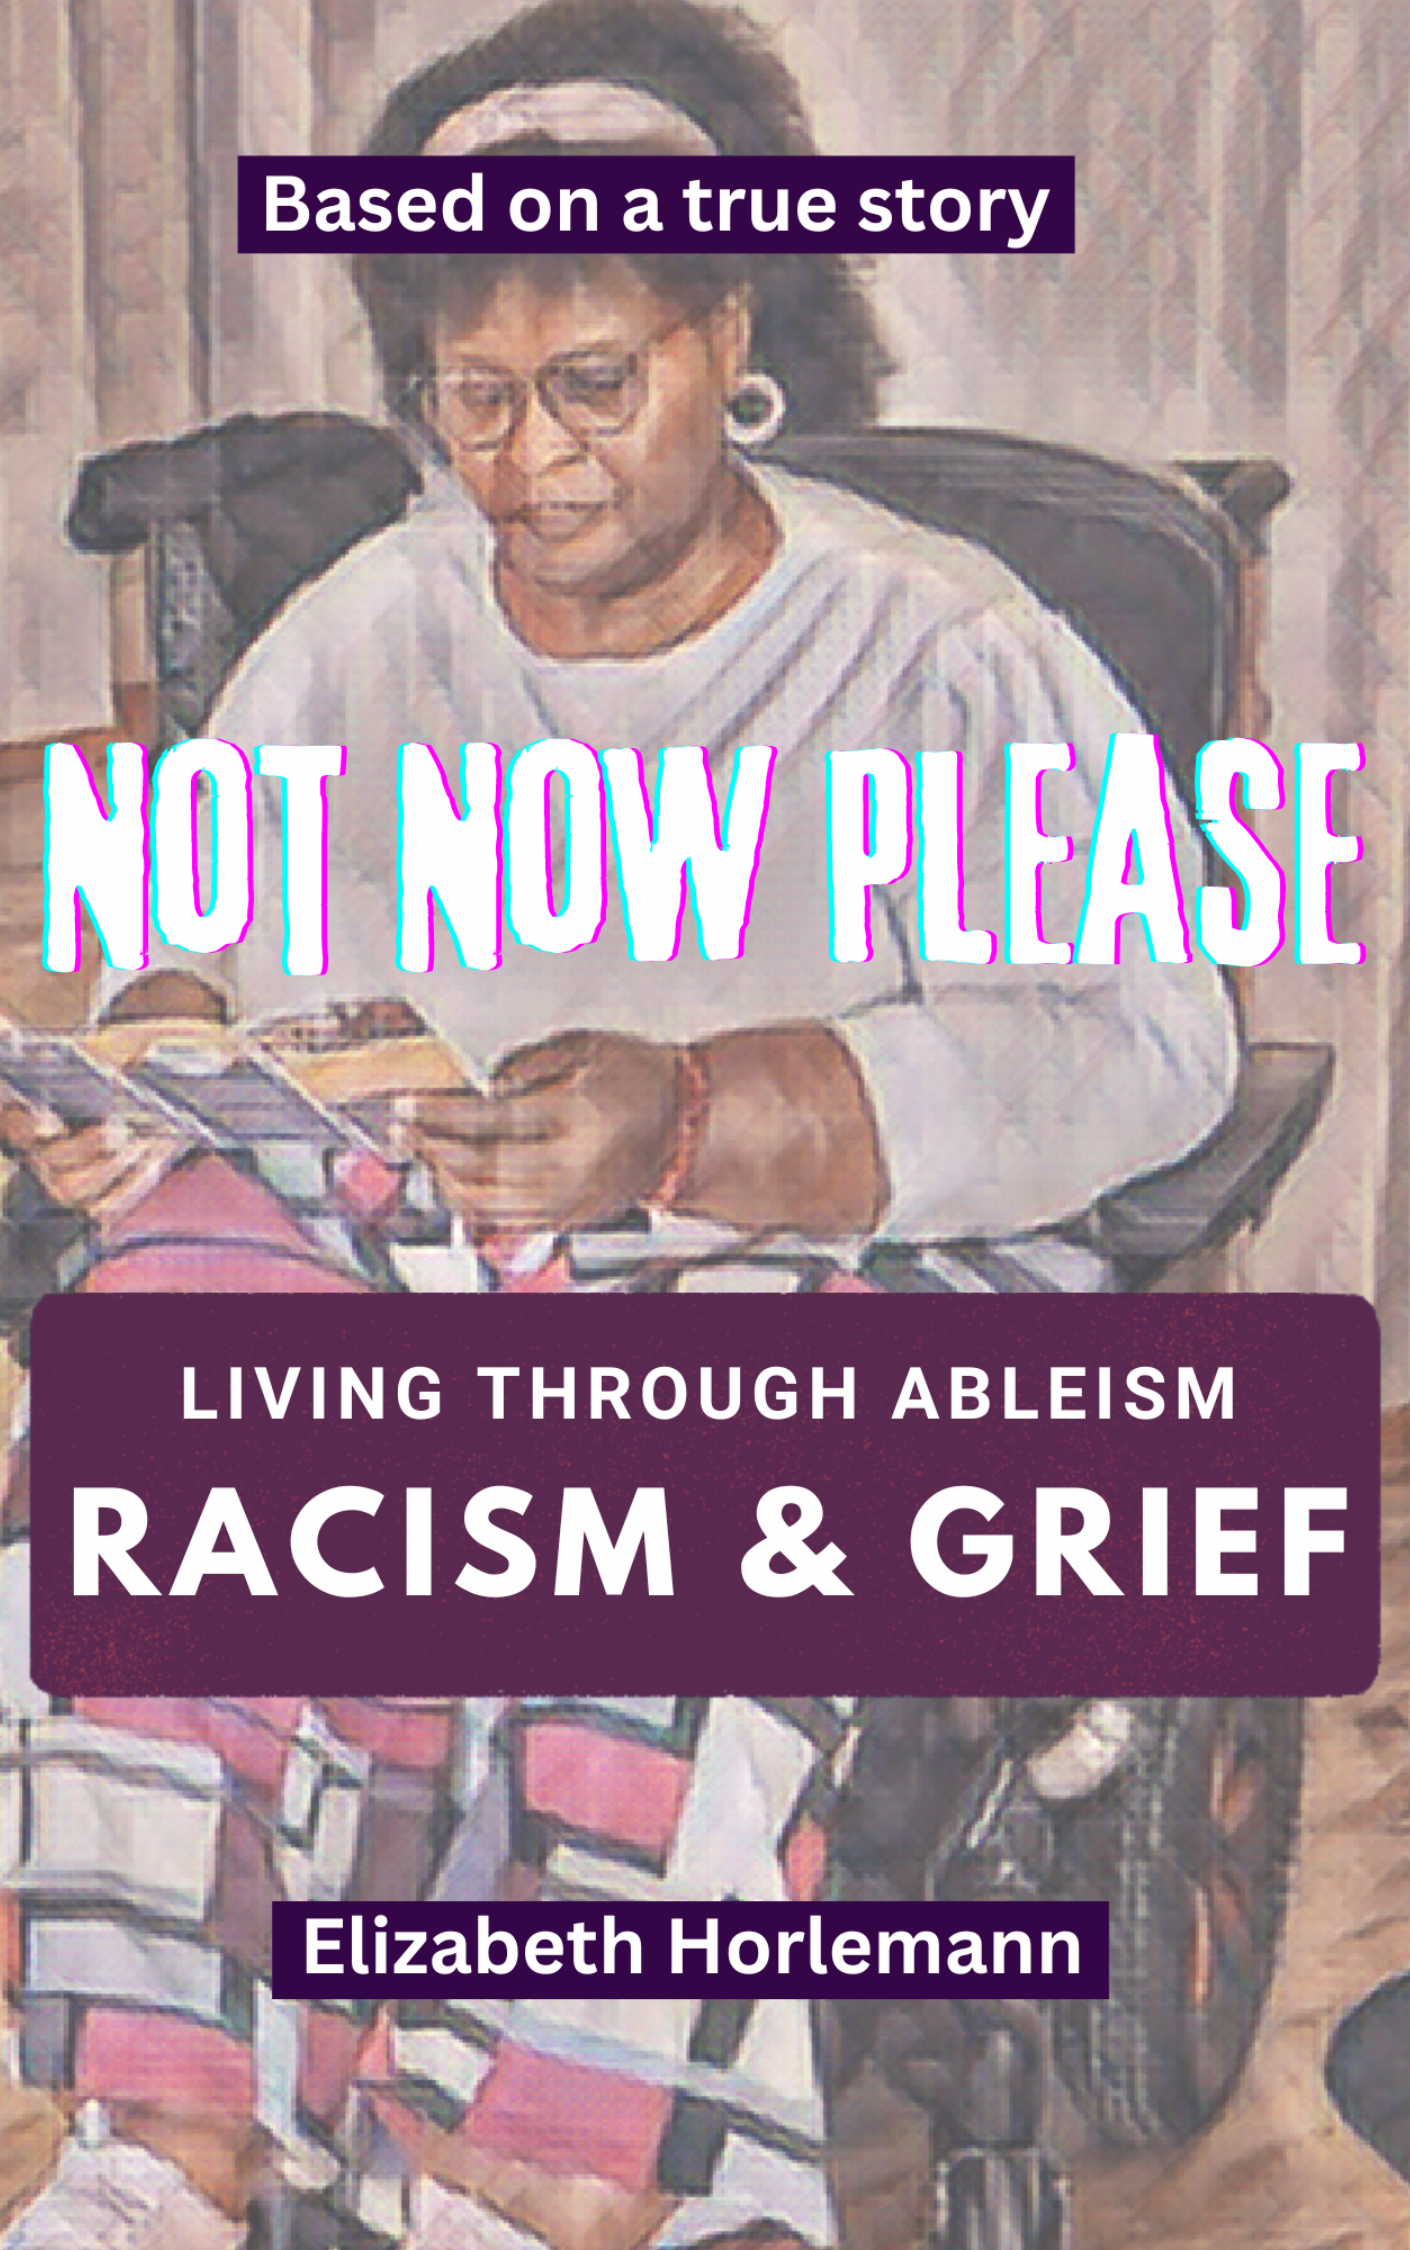 The Unseen Burden: How Racism Deepens Trauma for BIPOC During the End-of-Life Process